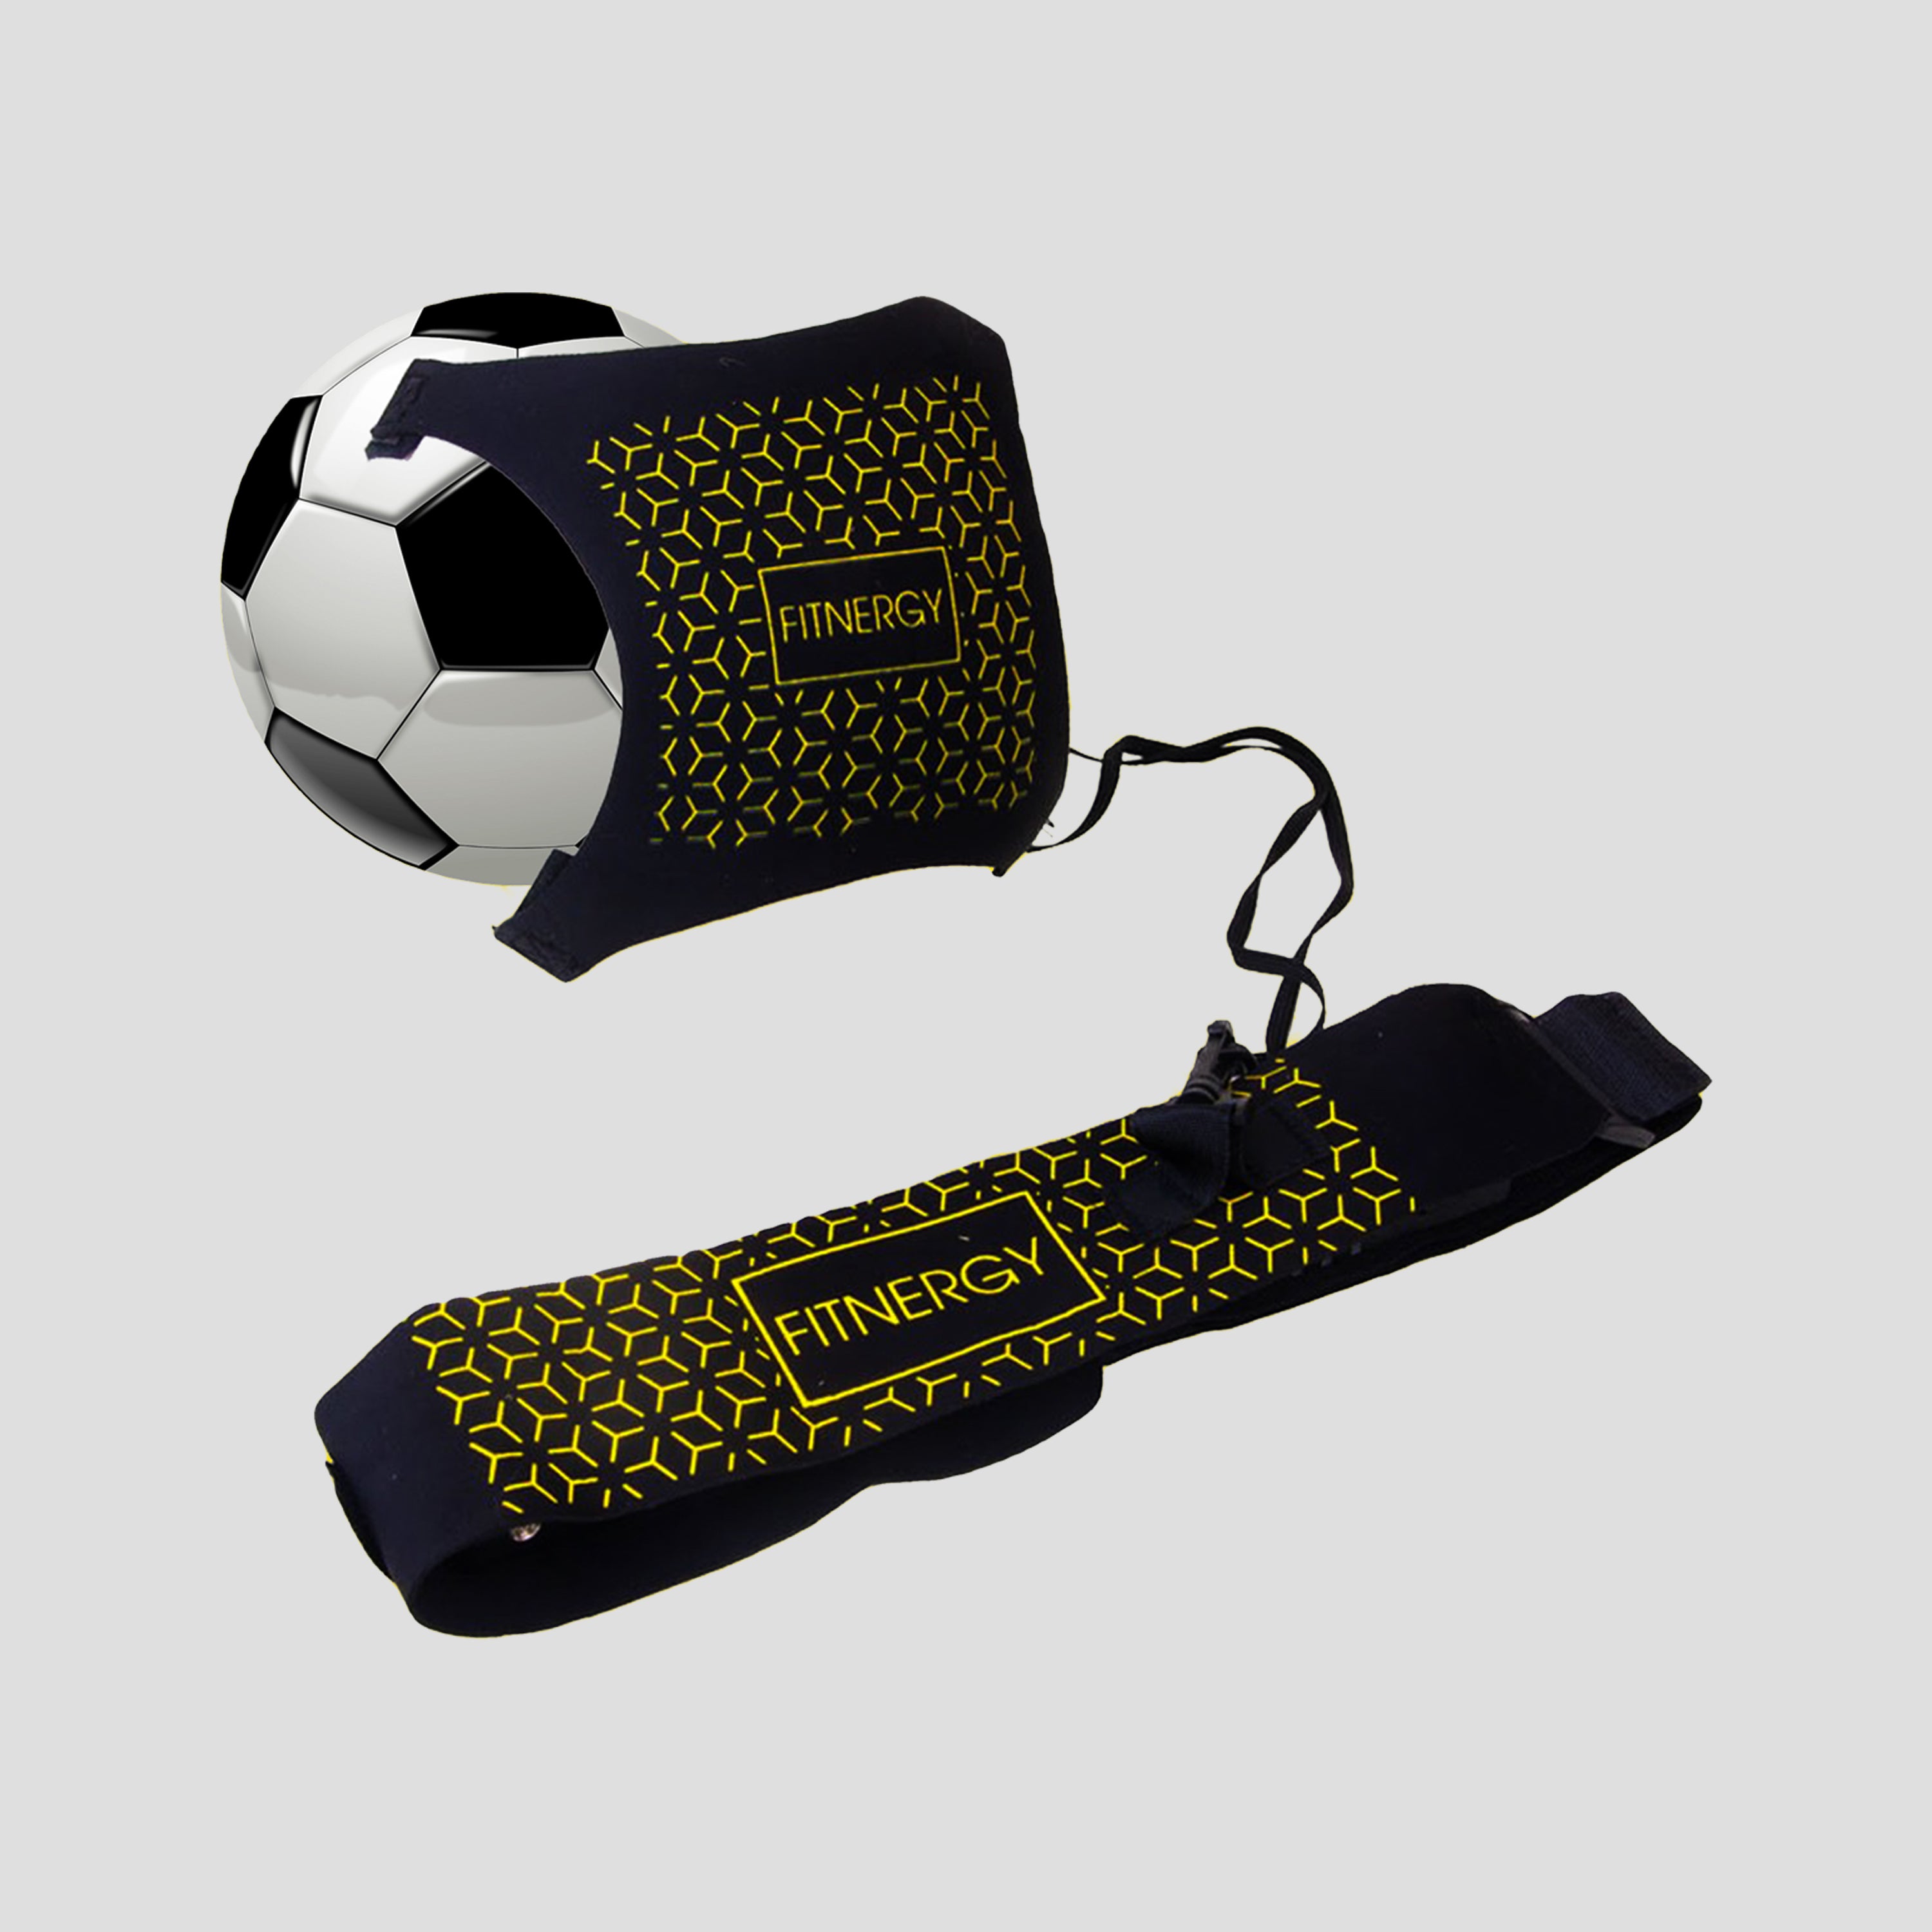 Football Kick Trainer Soccer Training Aids Hands Free Throw Sole